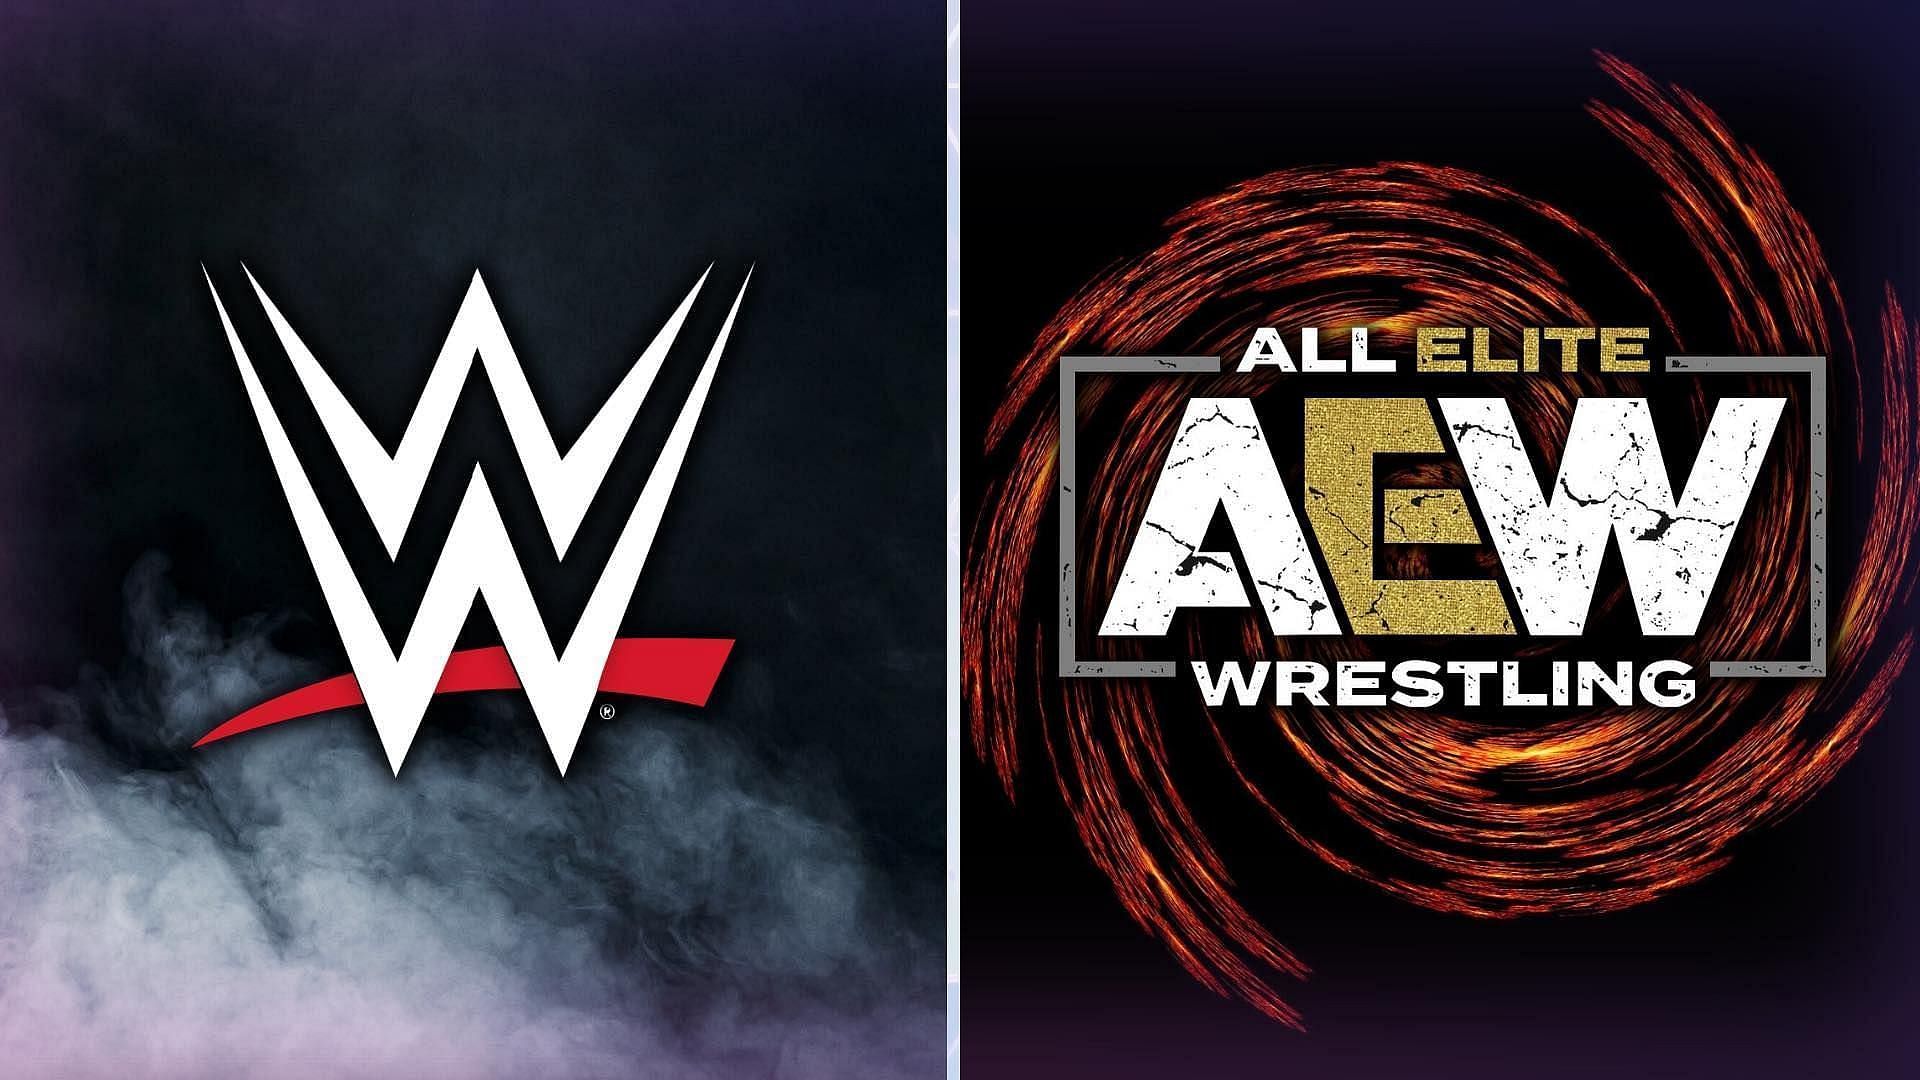 WWE and AEW are the two biggest wrestling companies in the world.